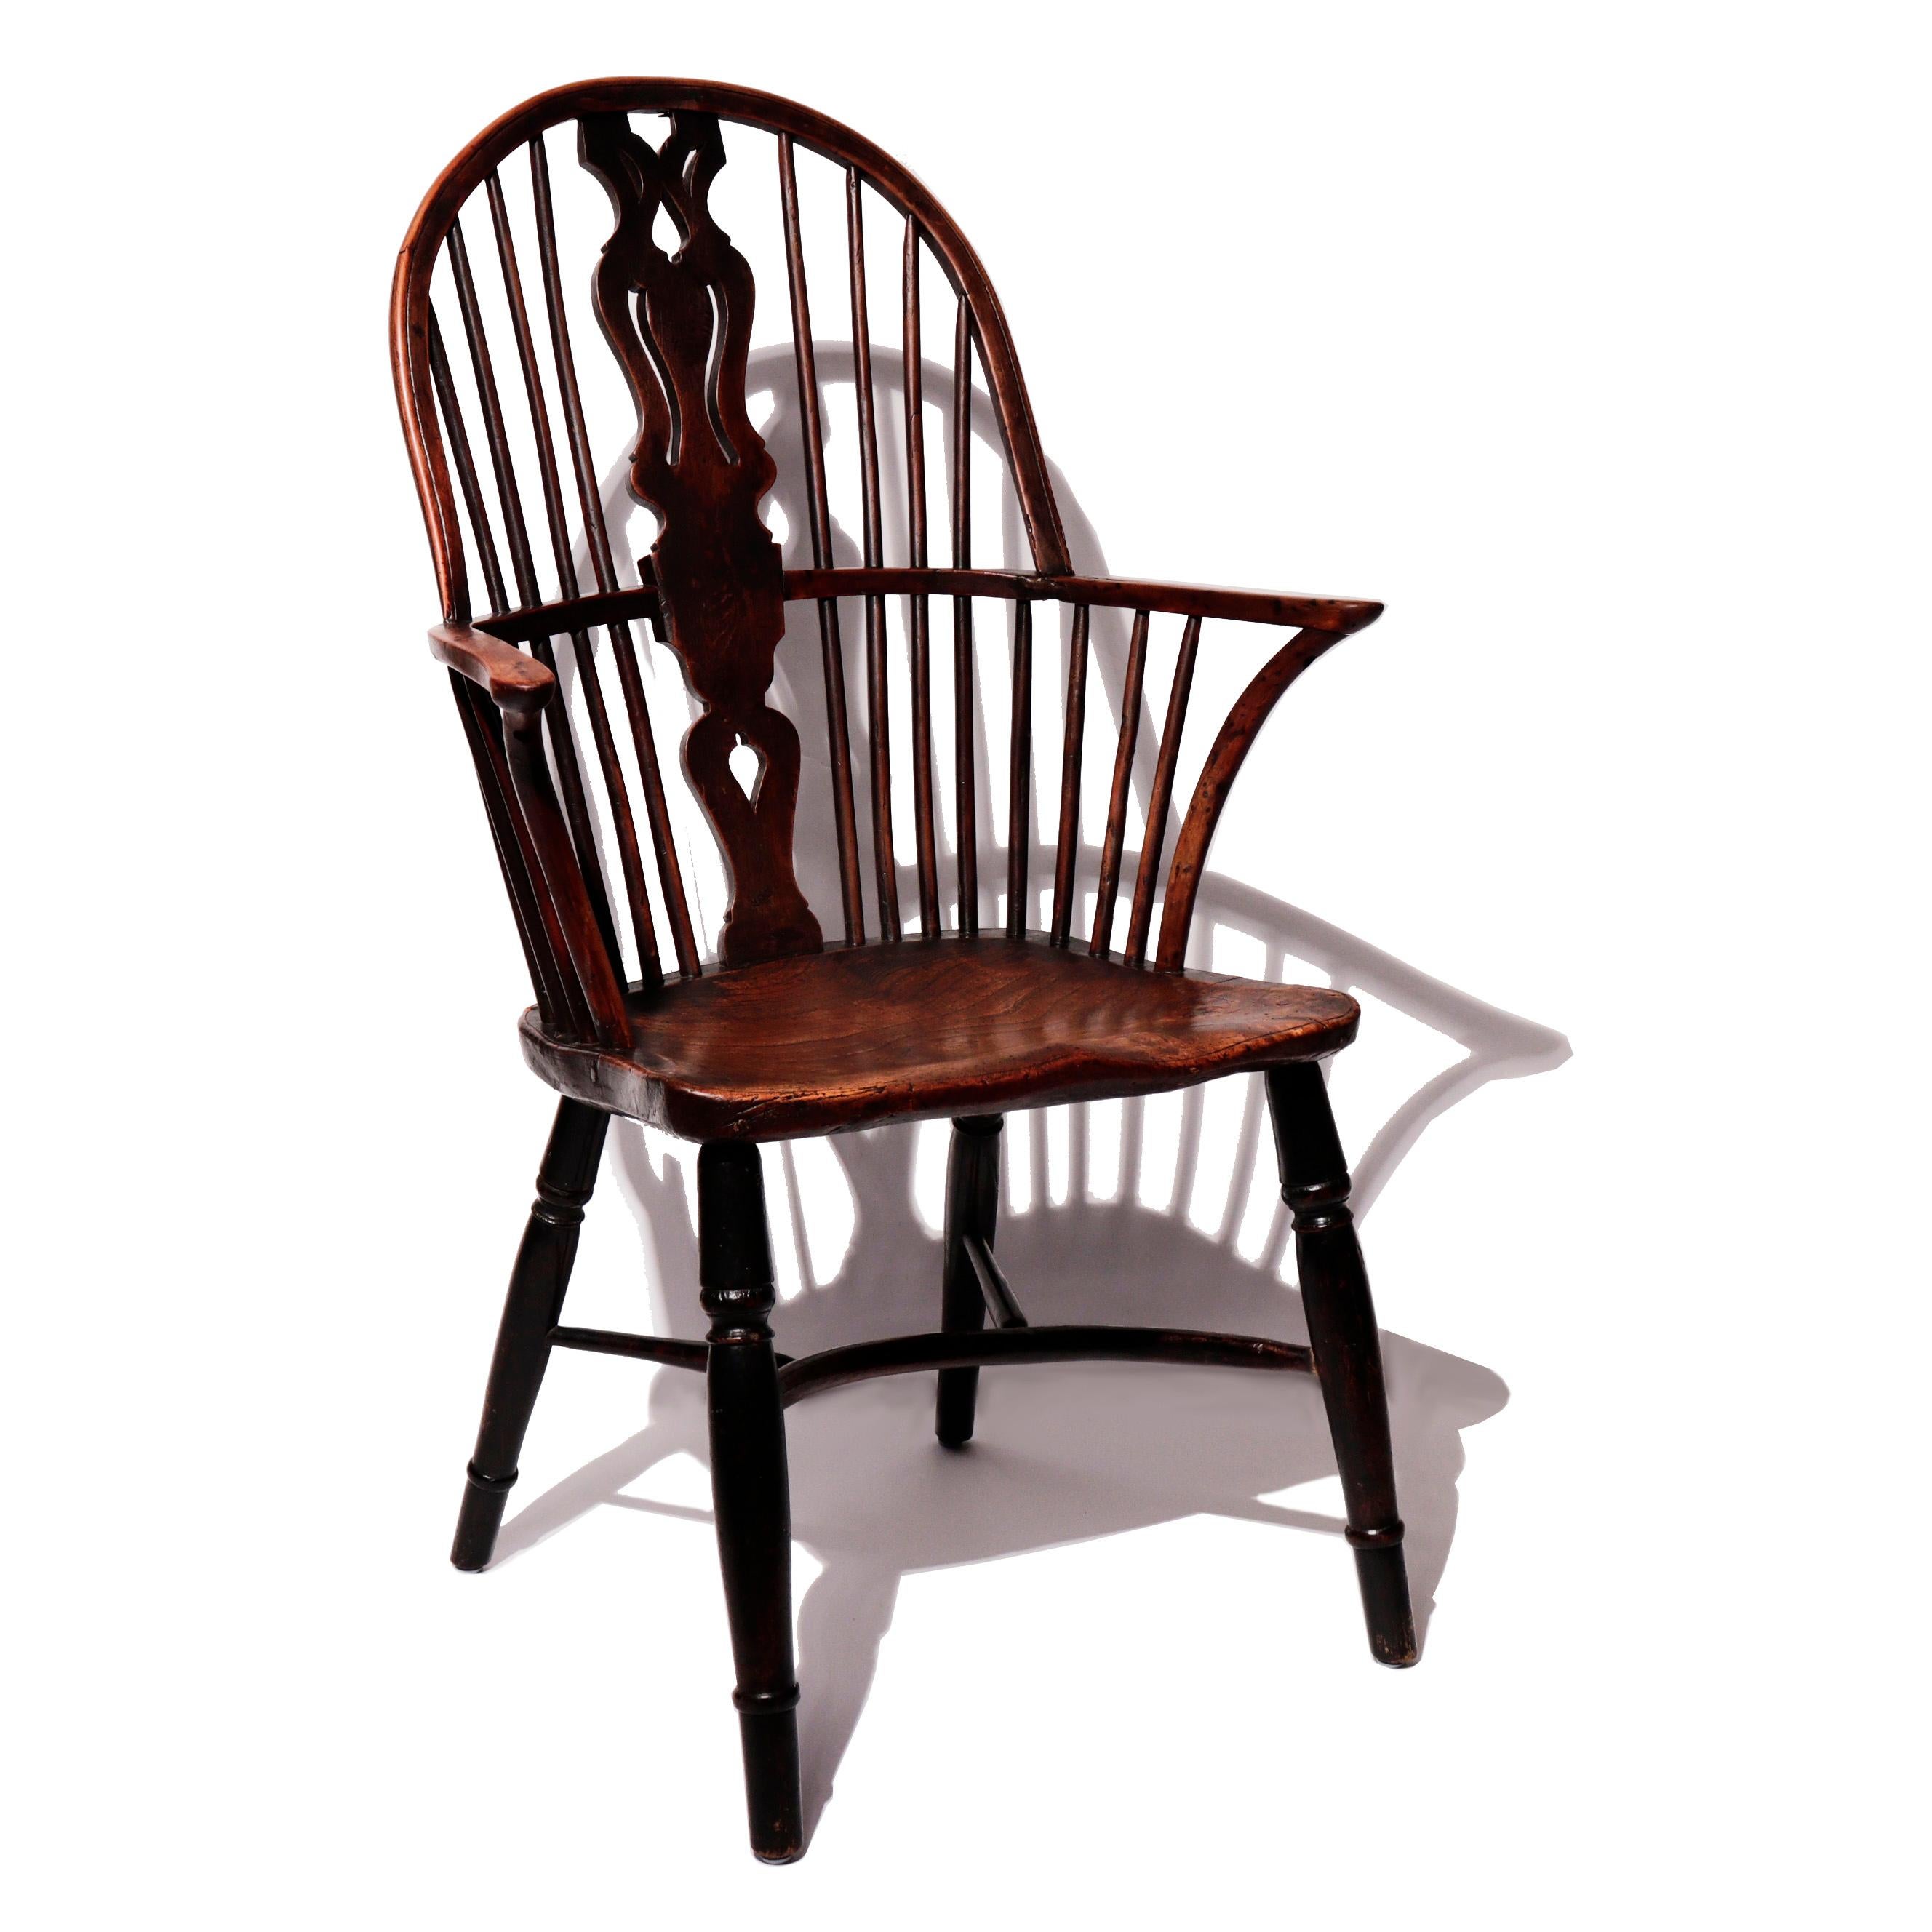 Antique English Georgian High Windsor Armchair, the contoured saddle seat with a rich grained elm, the rest crafted from yew, turned baluster  legs joined by a a crinoline stretcher, a large and well detailed pierced-shaped back splat, splayed out